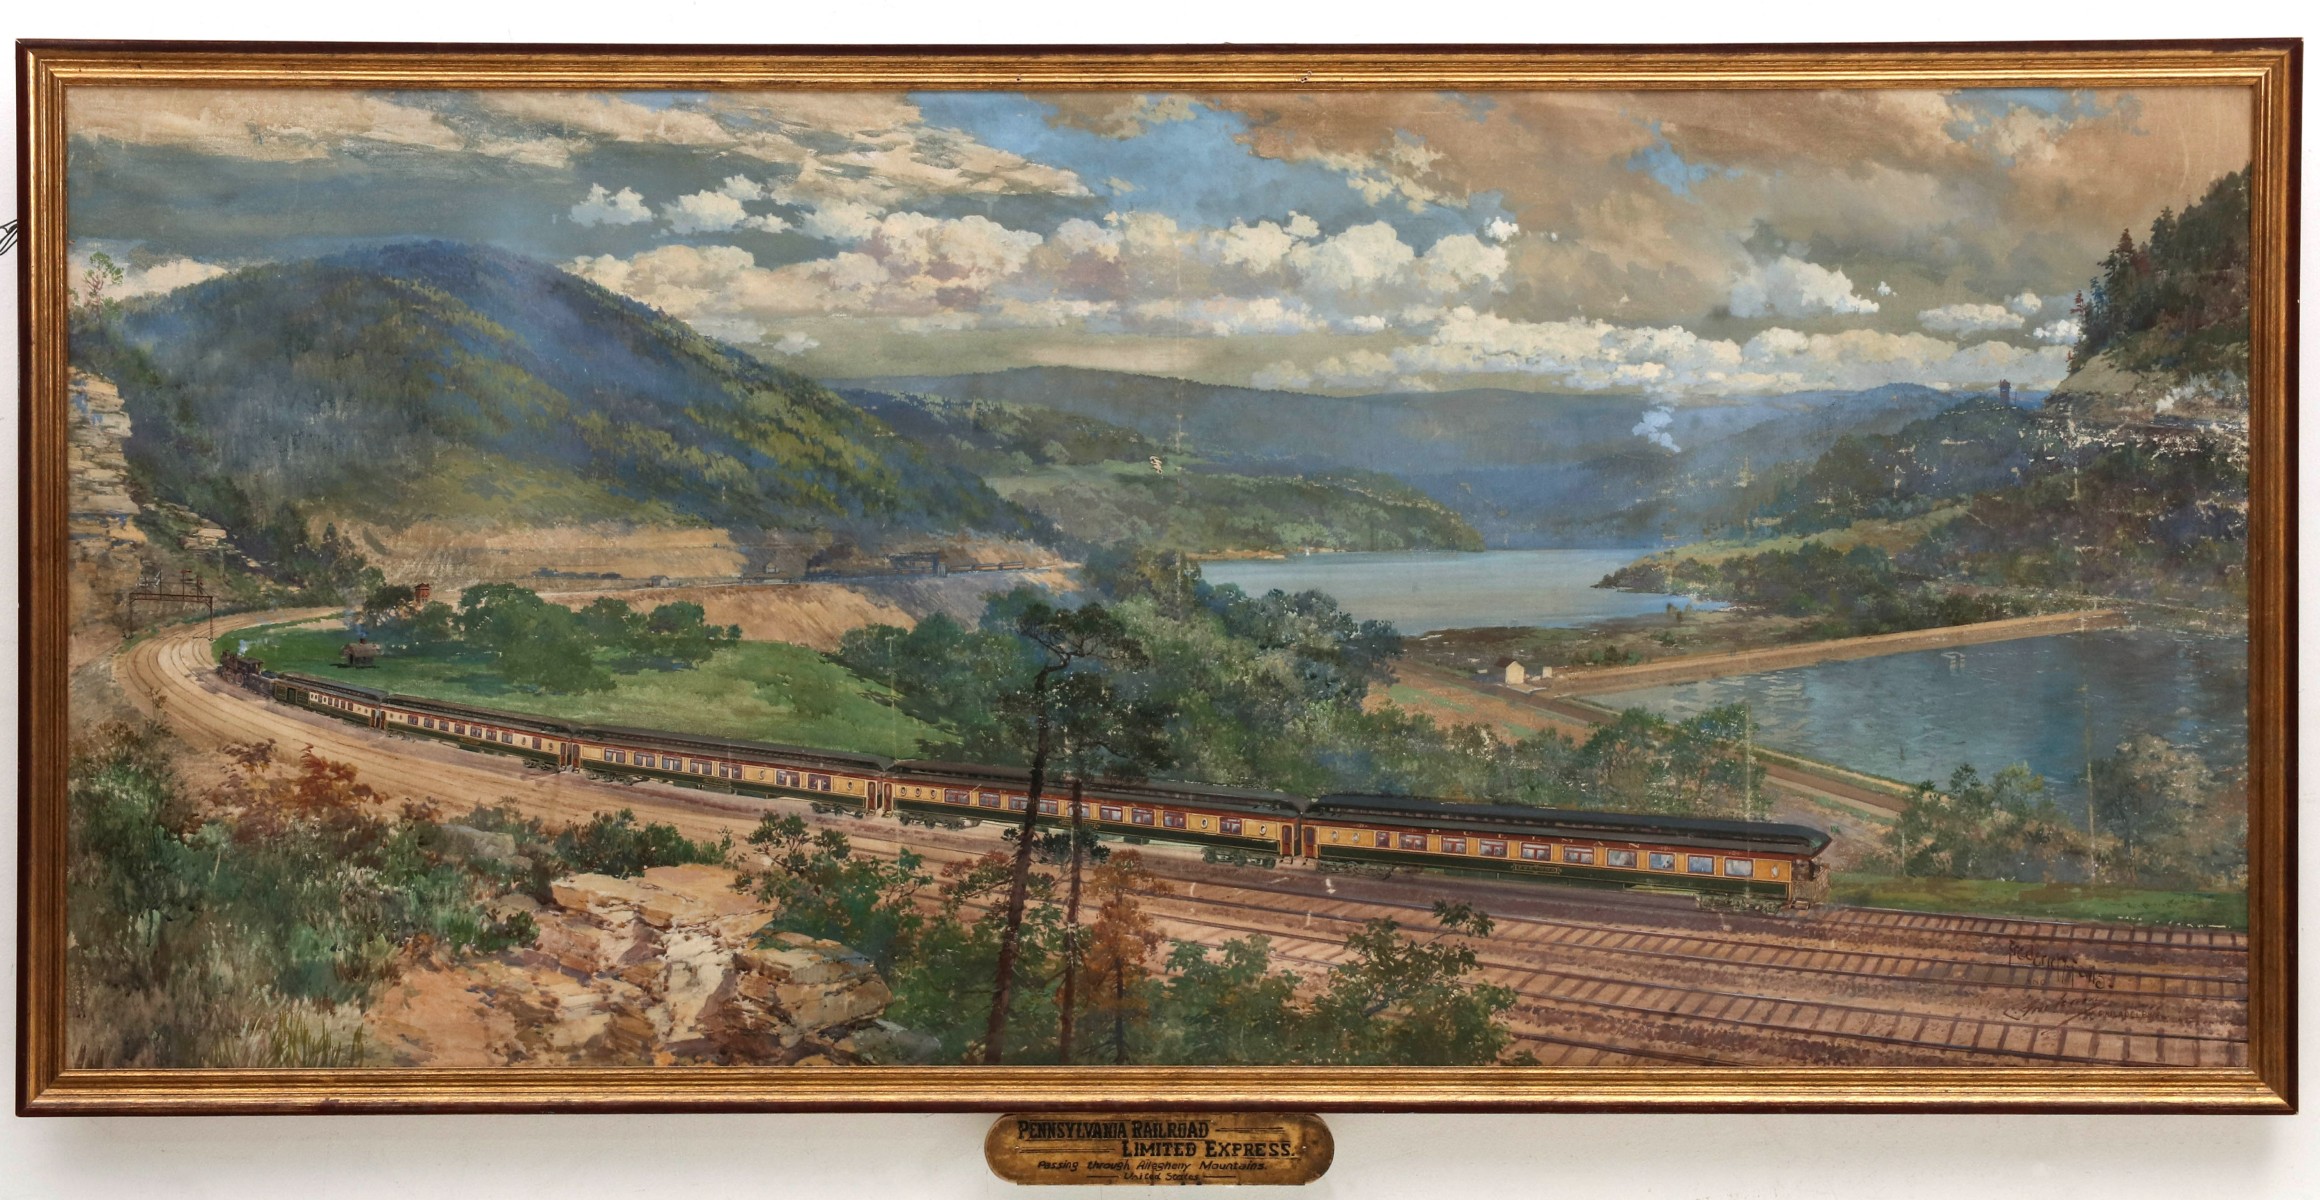 CHARLES GRAHAM PAINTING OF PRR LIMITED EXPRESS C. 1880